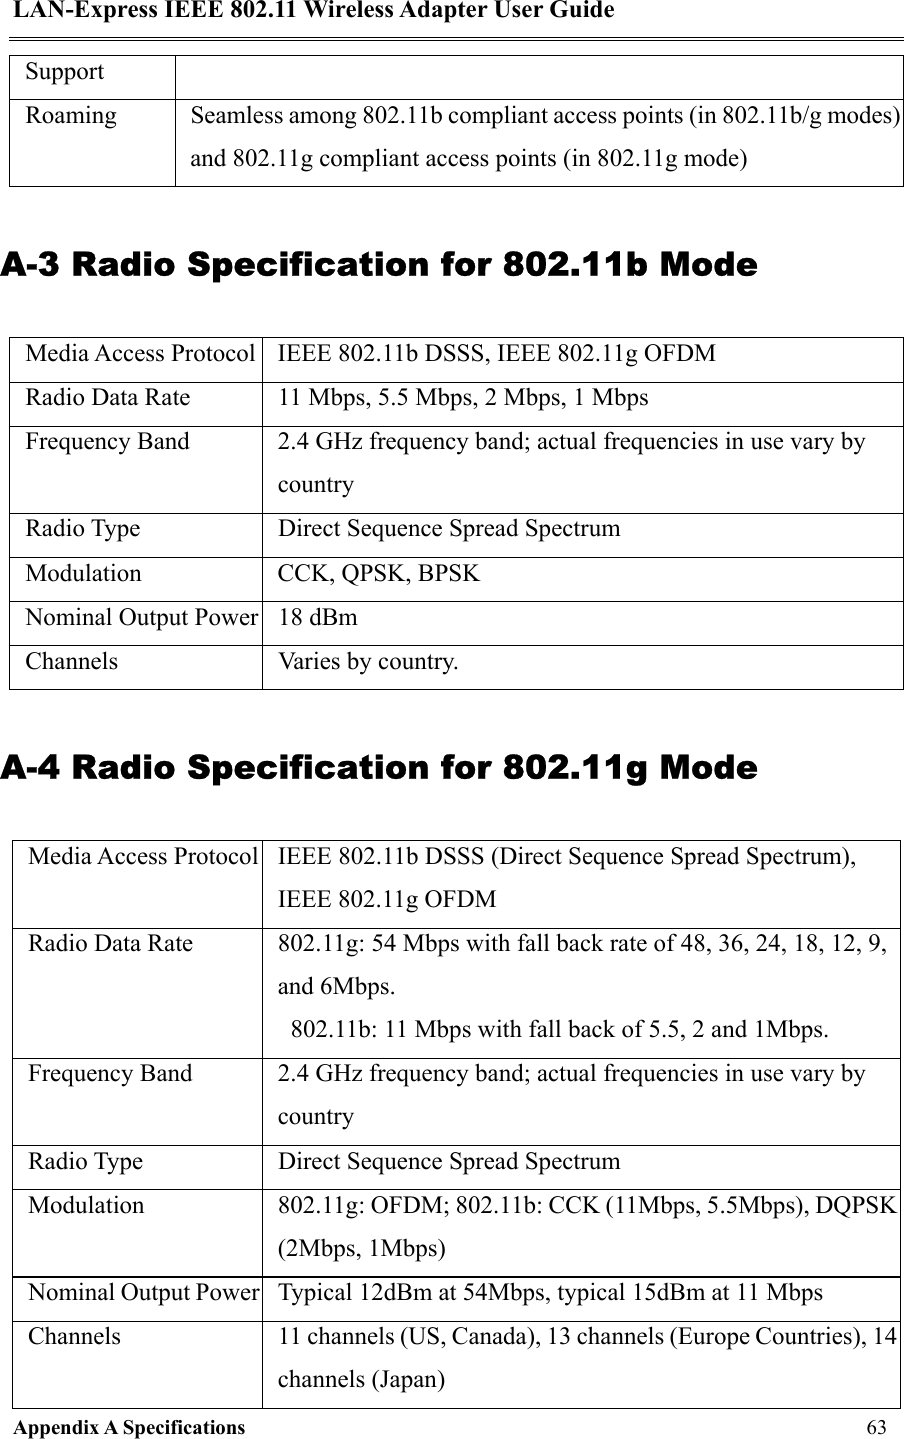 LAN-Express IEEE 802.11 Wireless Adapter User Guide Appendix A Specifications   63  Support Roaming  Seamless among 802.11b compliant access points (in 802.11b/g modes) and 802.11g compliant access points (in 802.11g mode) A-3 Radio Specification for 802.11b Mode Media Access Protocol  IEEE 802.11b DSSS, IEEE 802.11g OFDM Radio Data Rate  11 Mbps, 5.5 Mbps, 2 Mbps, 1 Mbps Frequency Band  2.4 GHz frequency band; actual frequencies in use vary by country Radio Type  Direct Sequence Spread Spectrum Modulation  CCK, QPSK, BPSK Nominal Output Power  18 dBm Channels  Varies by country. A-4 Radio Specification for 802.11g Mode Media Access Protocol  IEEE 802.11b DSSS (Direct Sequence Spread Spectrum), IEEE 802.11g OFDM Radio Data Rate  802.11g: 54 Mbps with fall back rate of 48, 36, 24, 18, 12, 9, and 6Mbps.     802.11b: 11 Mbps with fall back of 5.5, 2 and 1Mbps. Frequency Band  2.4 GHz frequency band; actual frequencies in use vary by country Radio Type  Direct Sequence Spread Spectrum Modulation  802.11g: OFDM; 802.11b: CCK (11Mbps, 5.5Mbps), DQPSK(2Mbps, 1Mbps) Nominal Output Power  Typical 12dBm at 54Mbps, typical 15dBm at 11 Mbps Channels  11 channels (US, Canada), 13 channels (Europe Countries), 14 channels (Japan) 